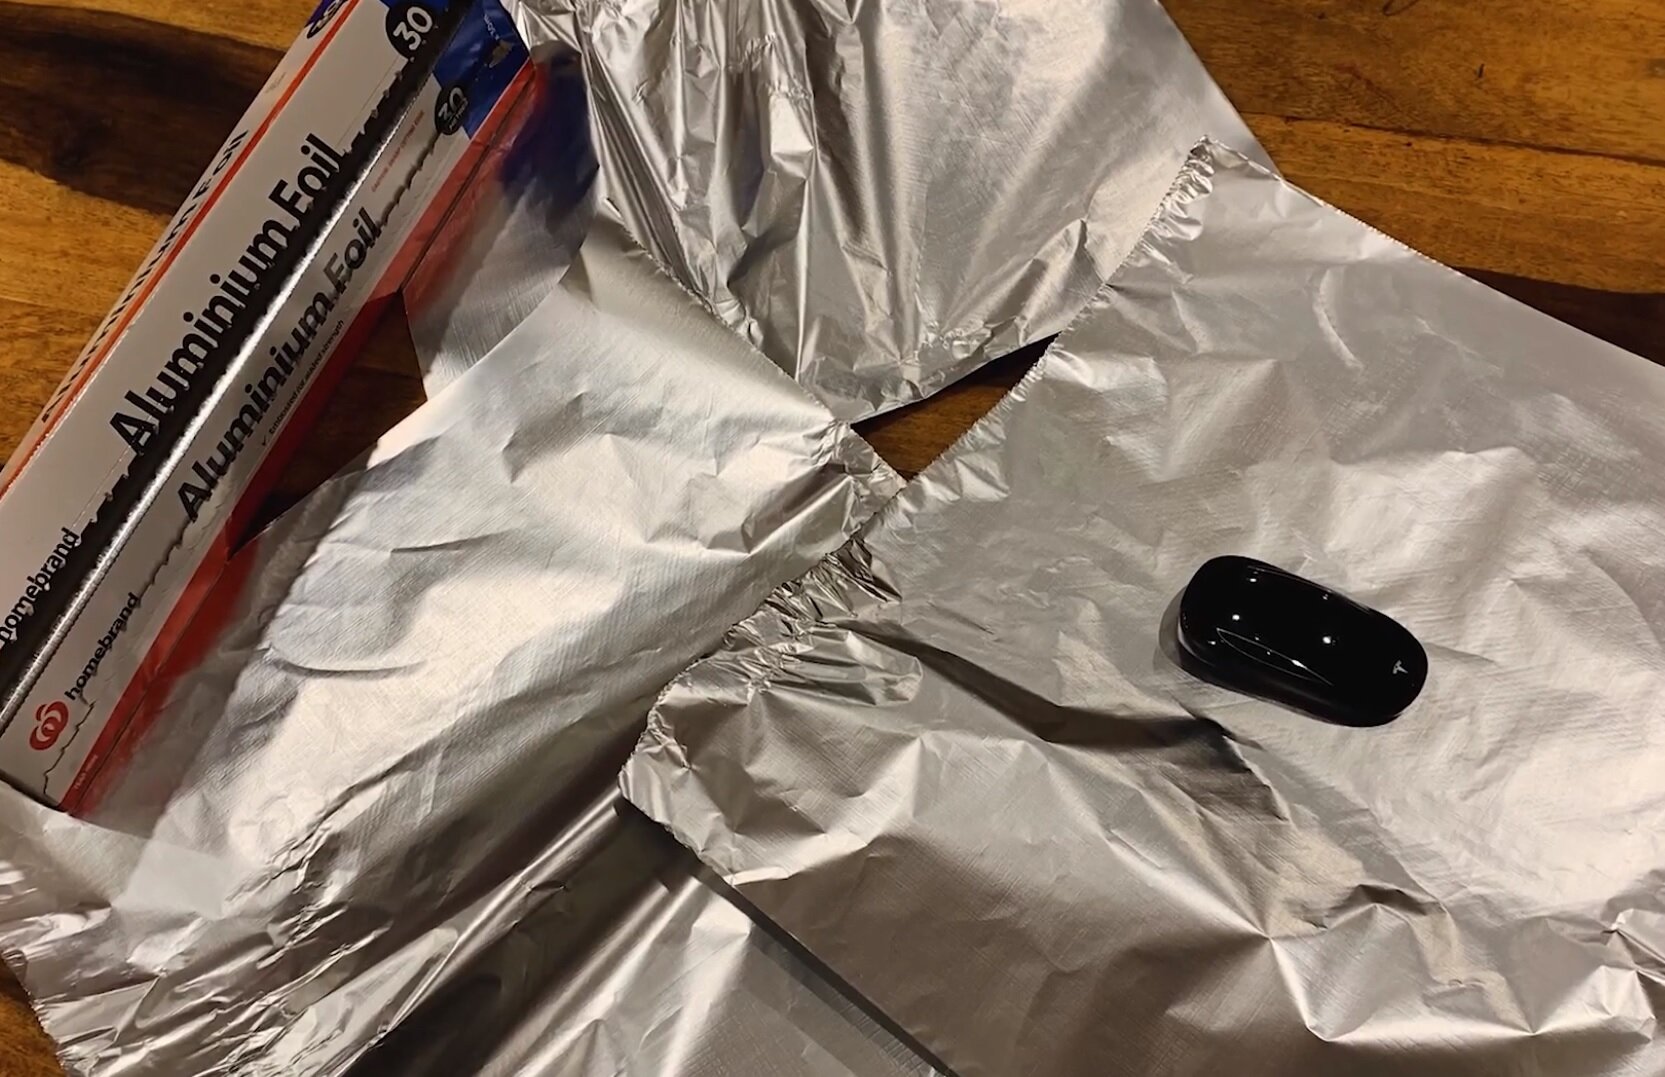 Wrap your X-Fob in foil (Faraday RF cage)